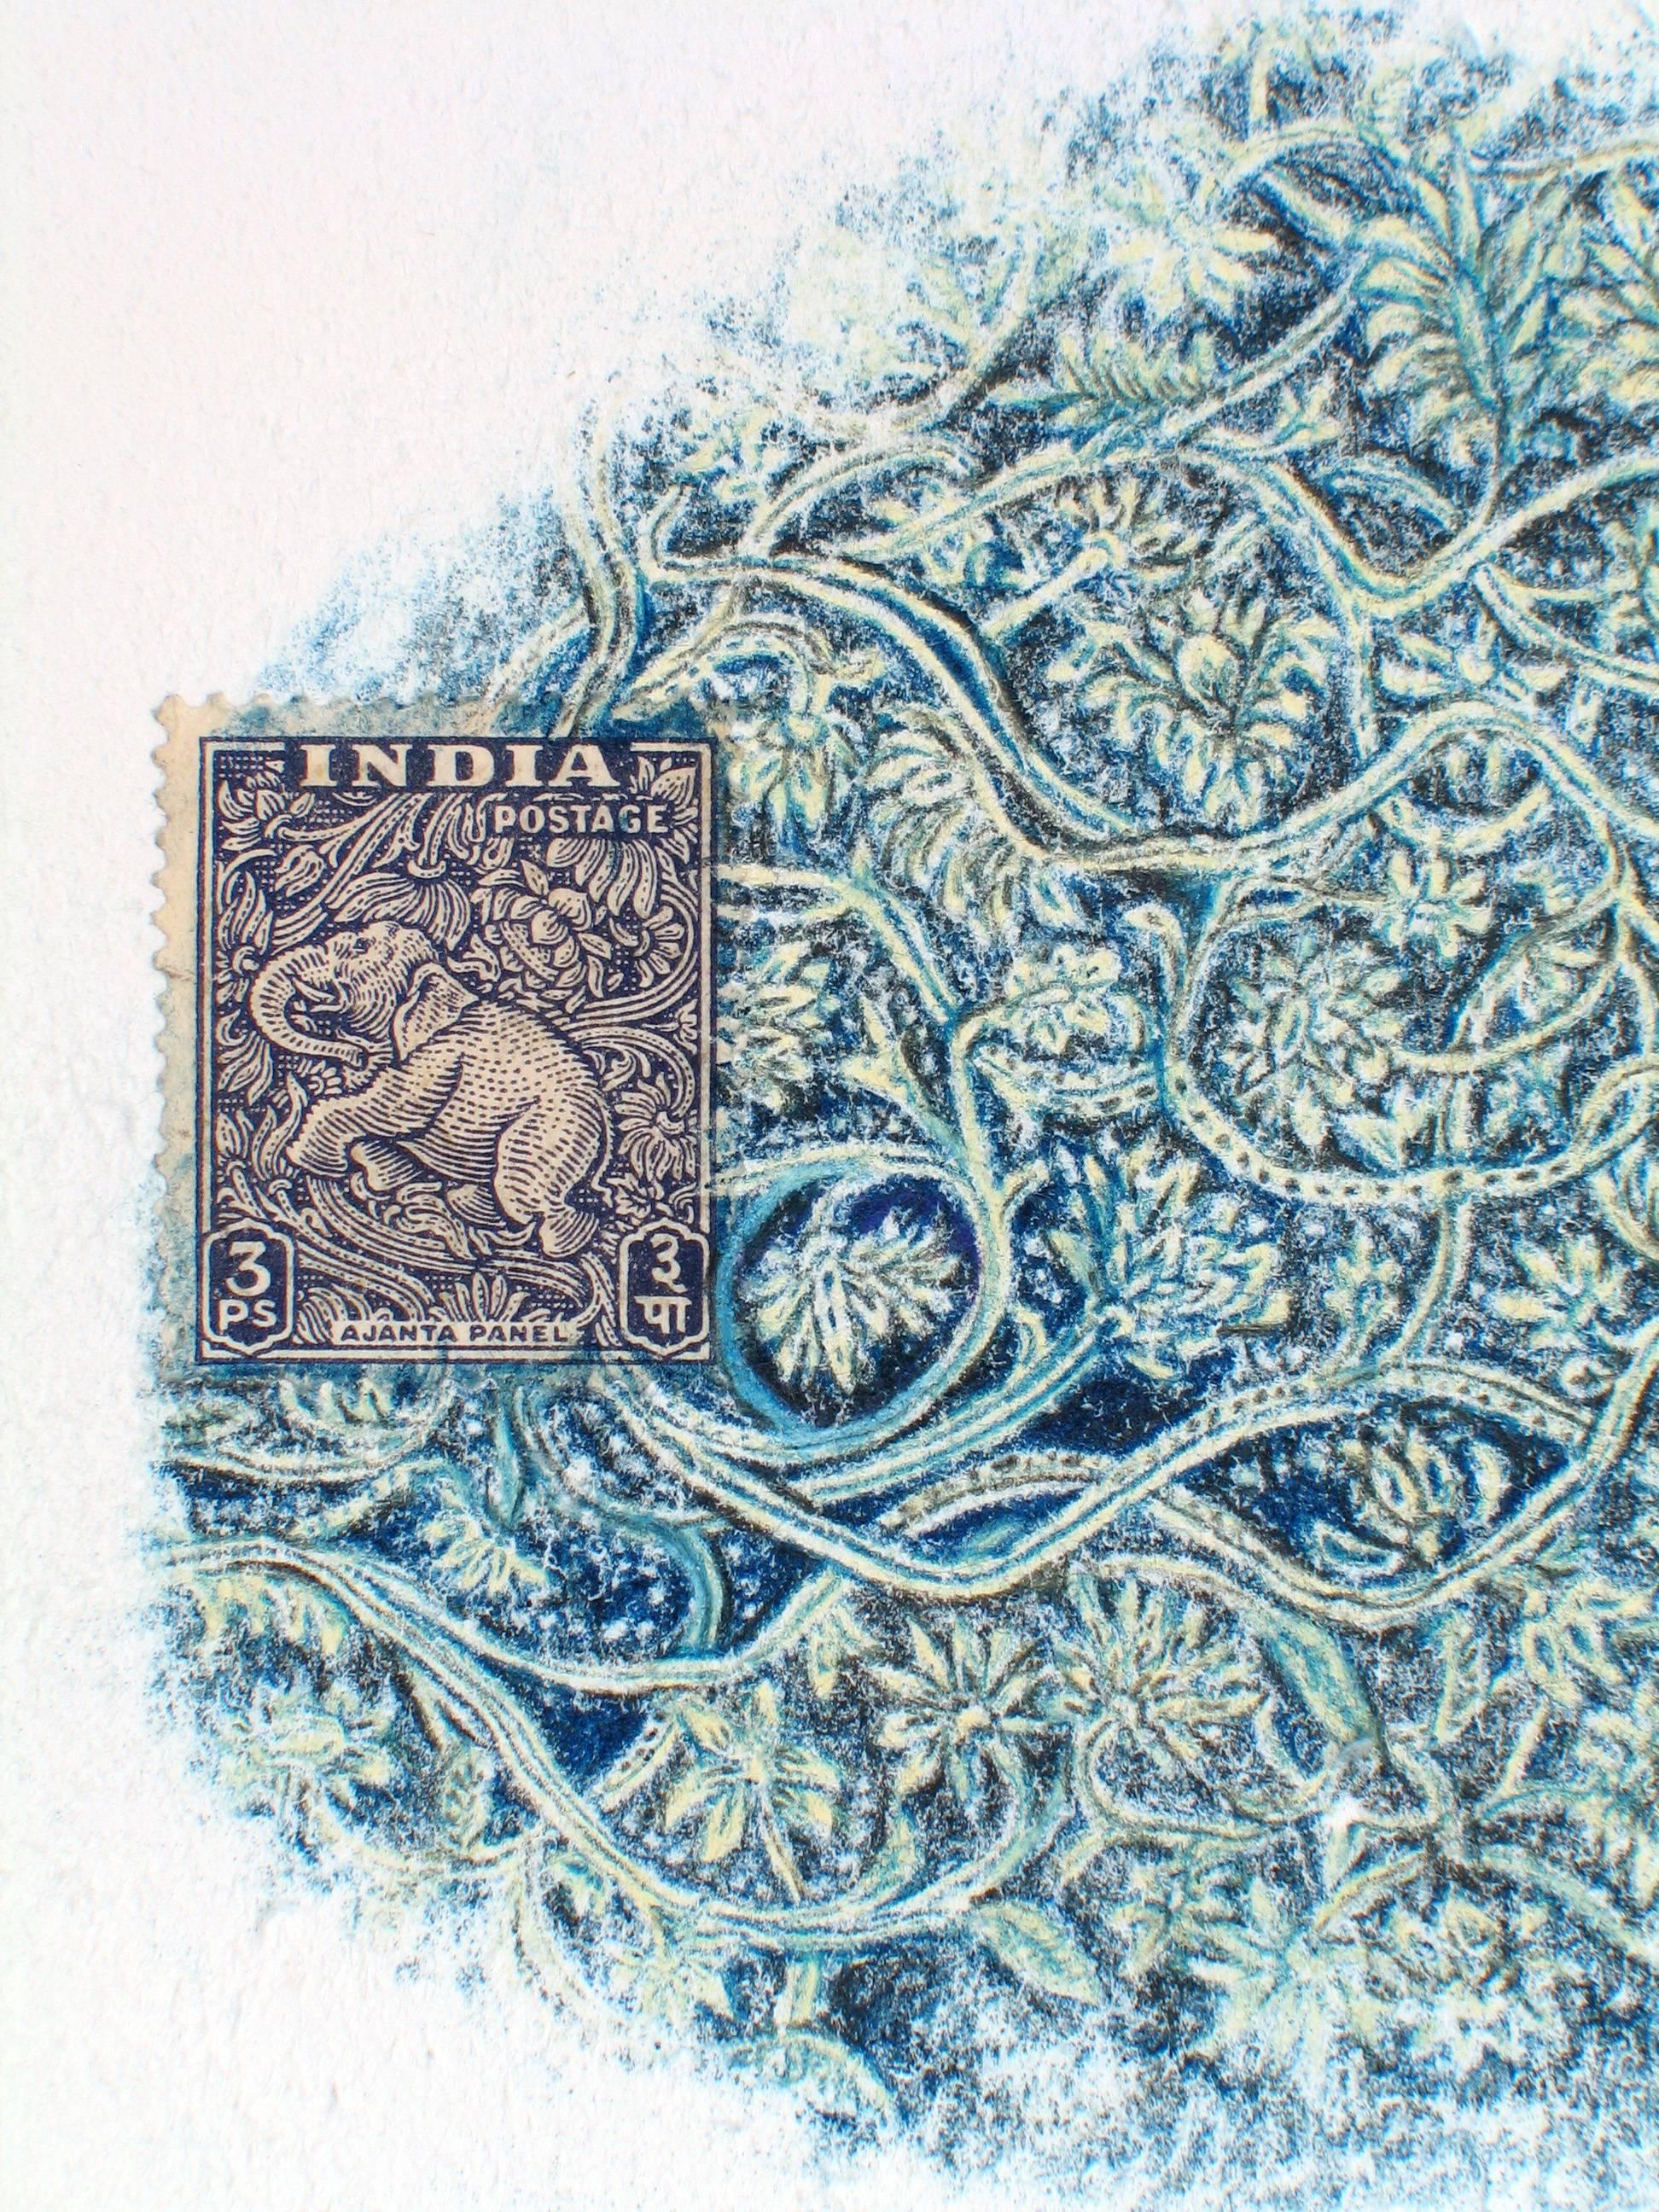 India, Elephant: Detailed Drawing with Unique Stamp and Blue Colored Pencil - Art by Andrea Moreau